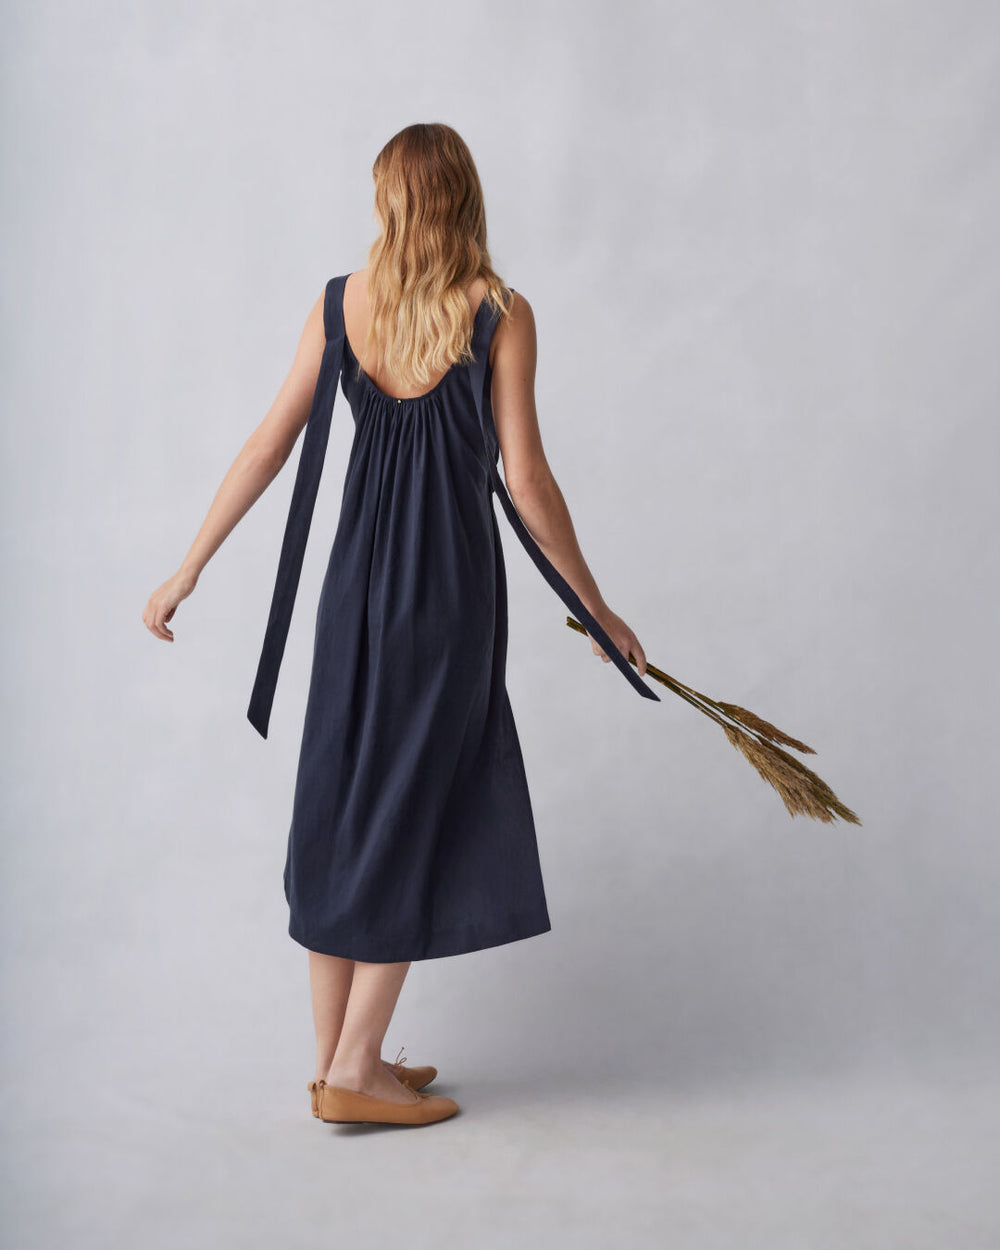 Woman in a dress holding a broom, walking away from the camera.